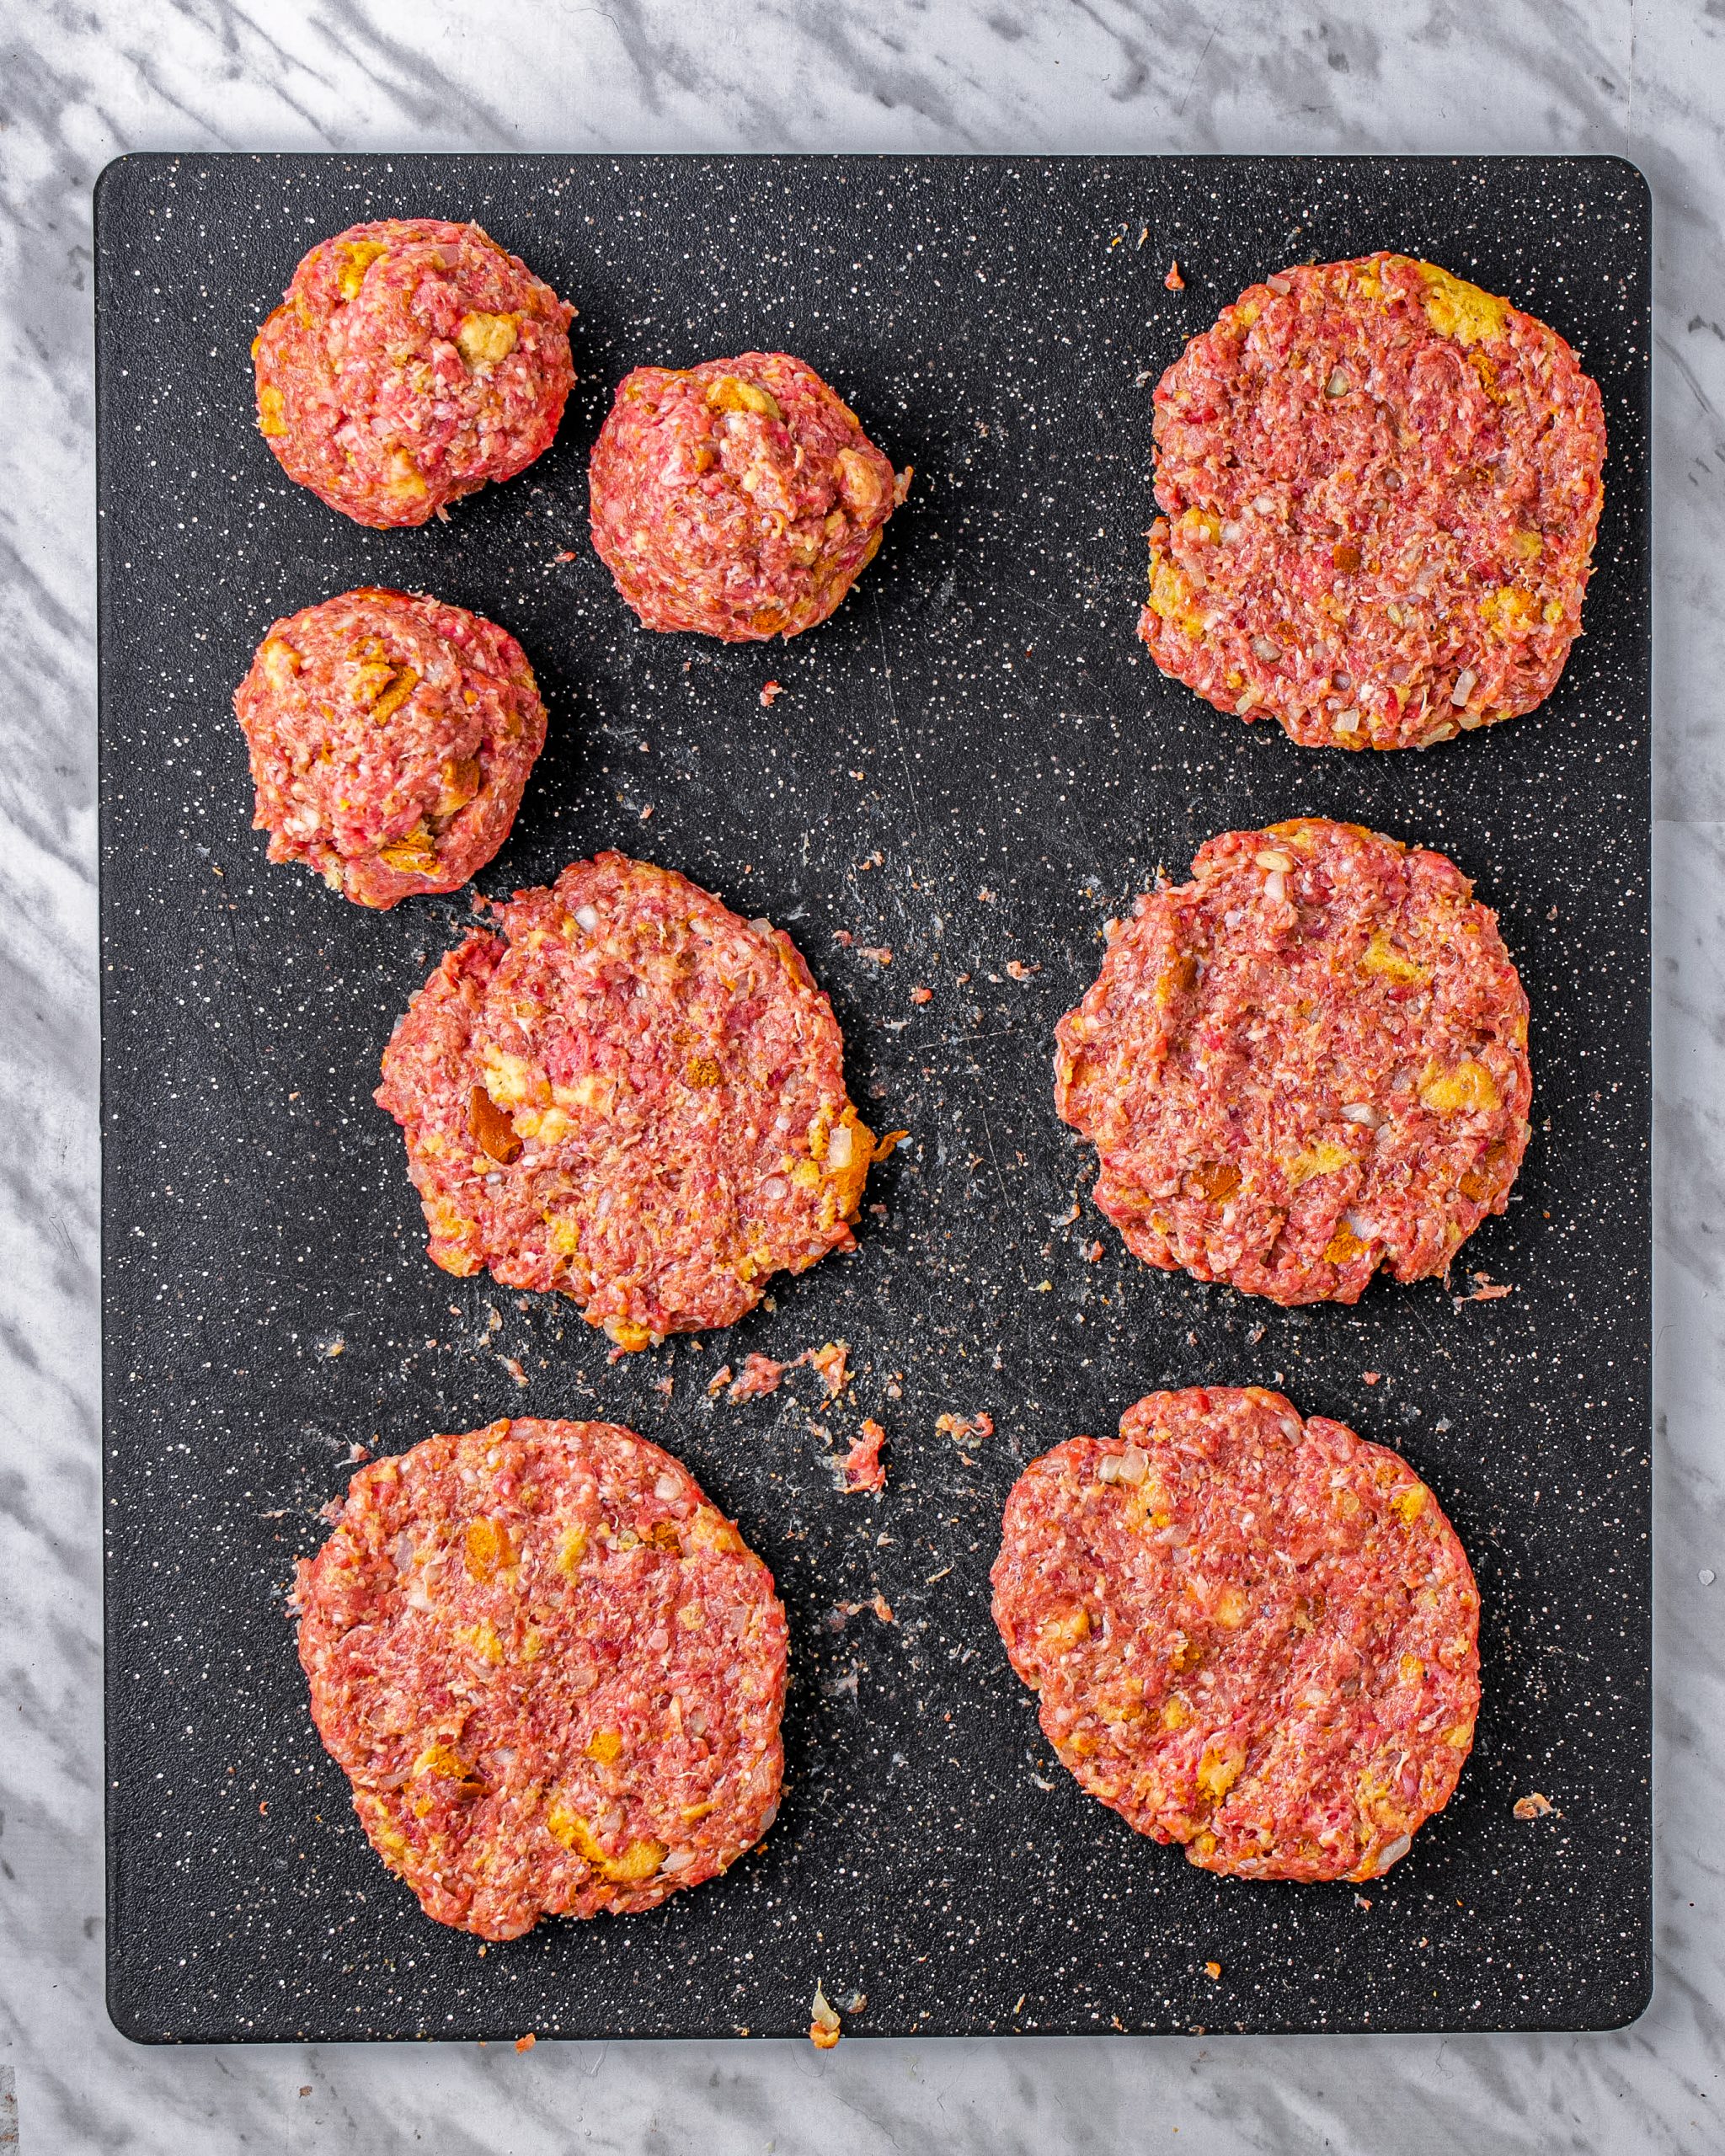 Form the meat mixture into 8 evenly sized patties